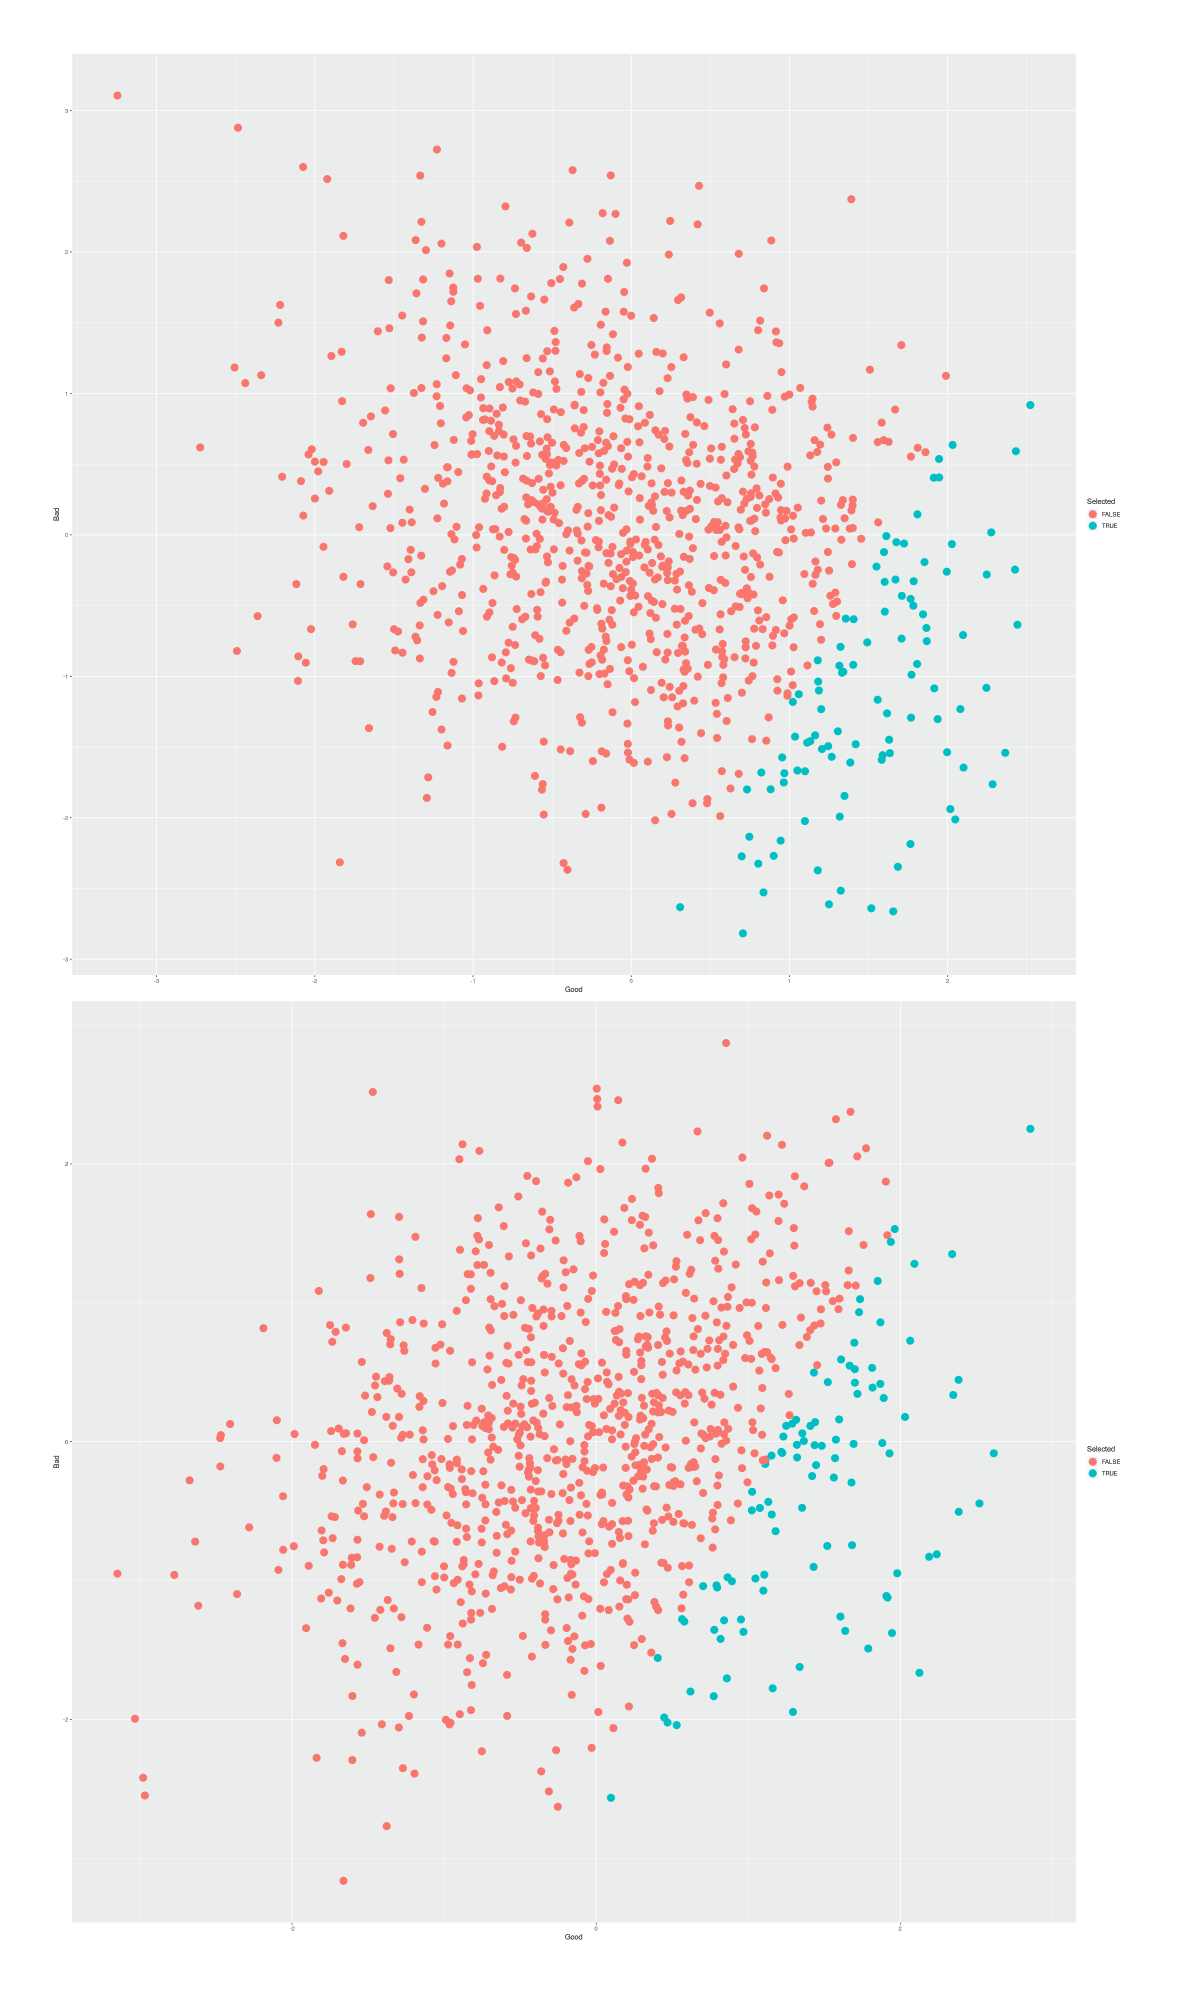 Gains Despite/Because Of Pleiotropy: 2 bivariate scatterplots demonstrating selected individuals in a population: a good & bad variable, which are either correlated r = 0.3 or r = -0.3, where the good variable is twice as important, and top 10% are selected. In both cases, progress is made in the desirable directions.